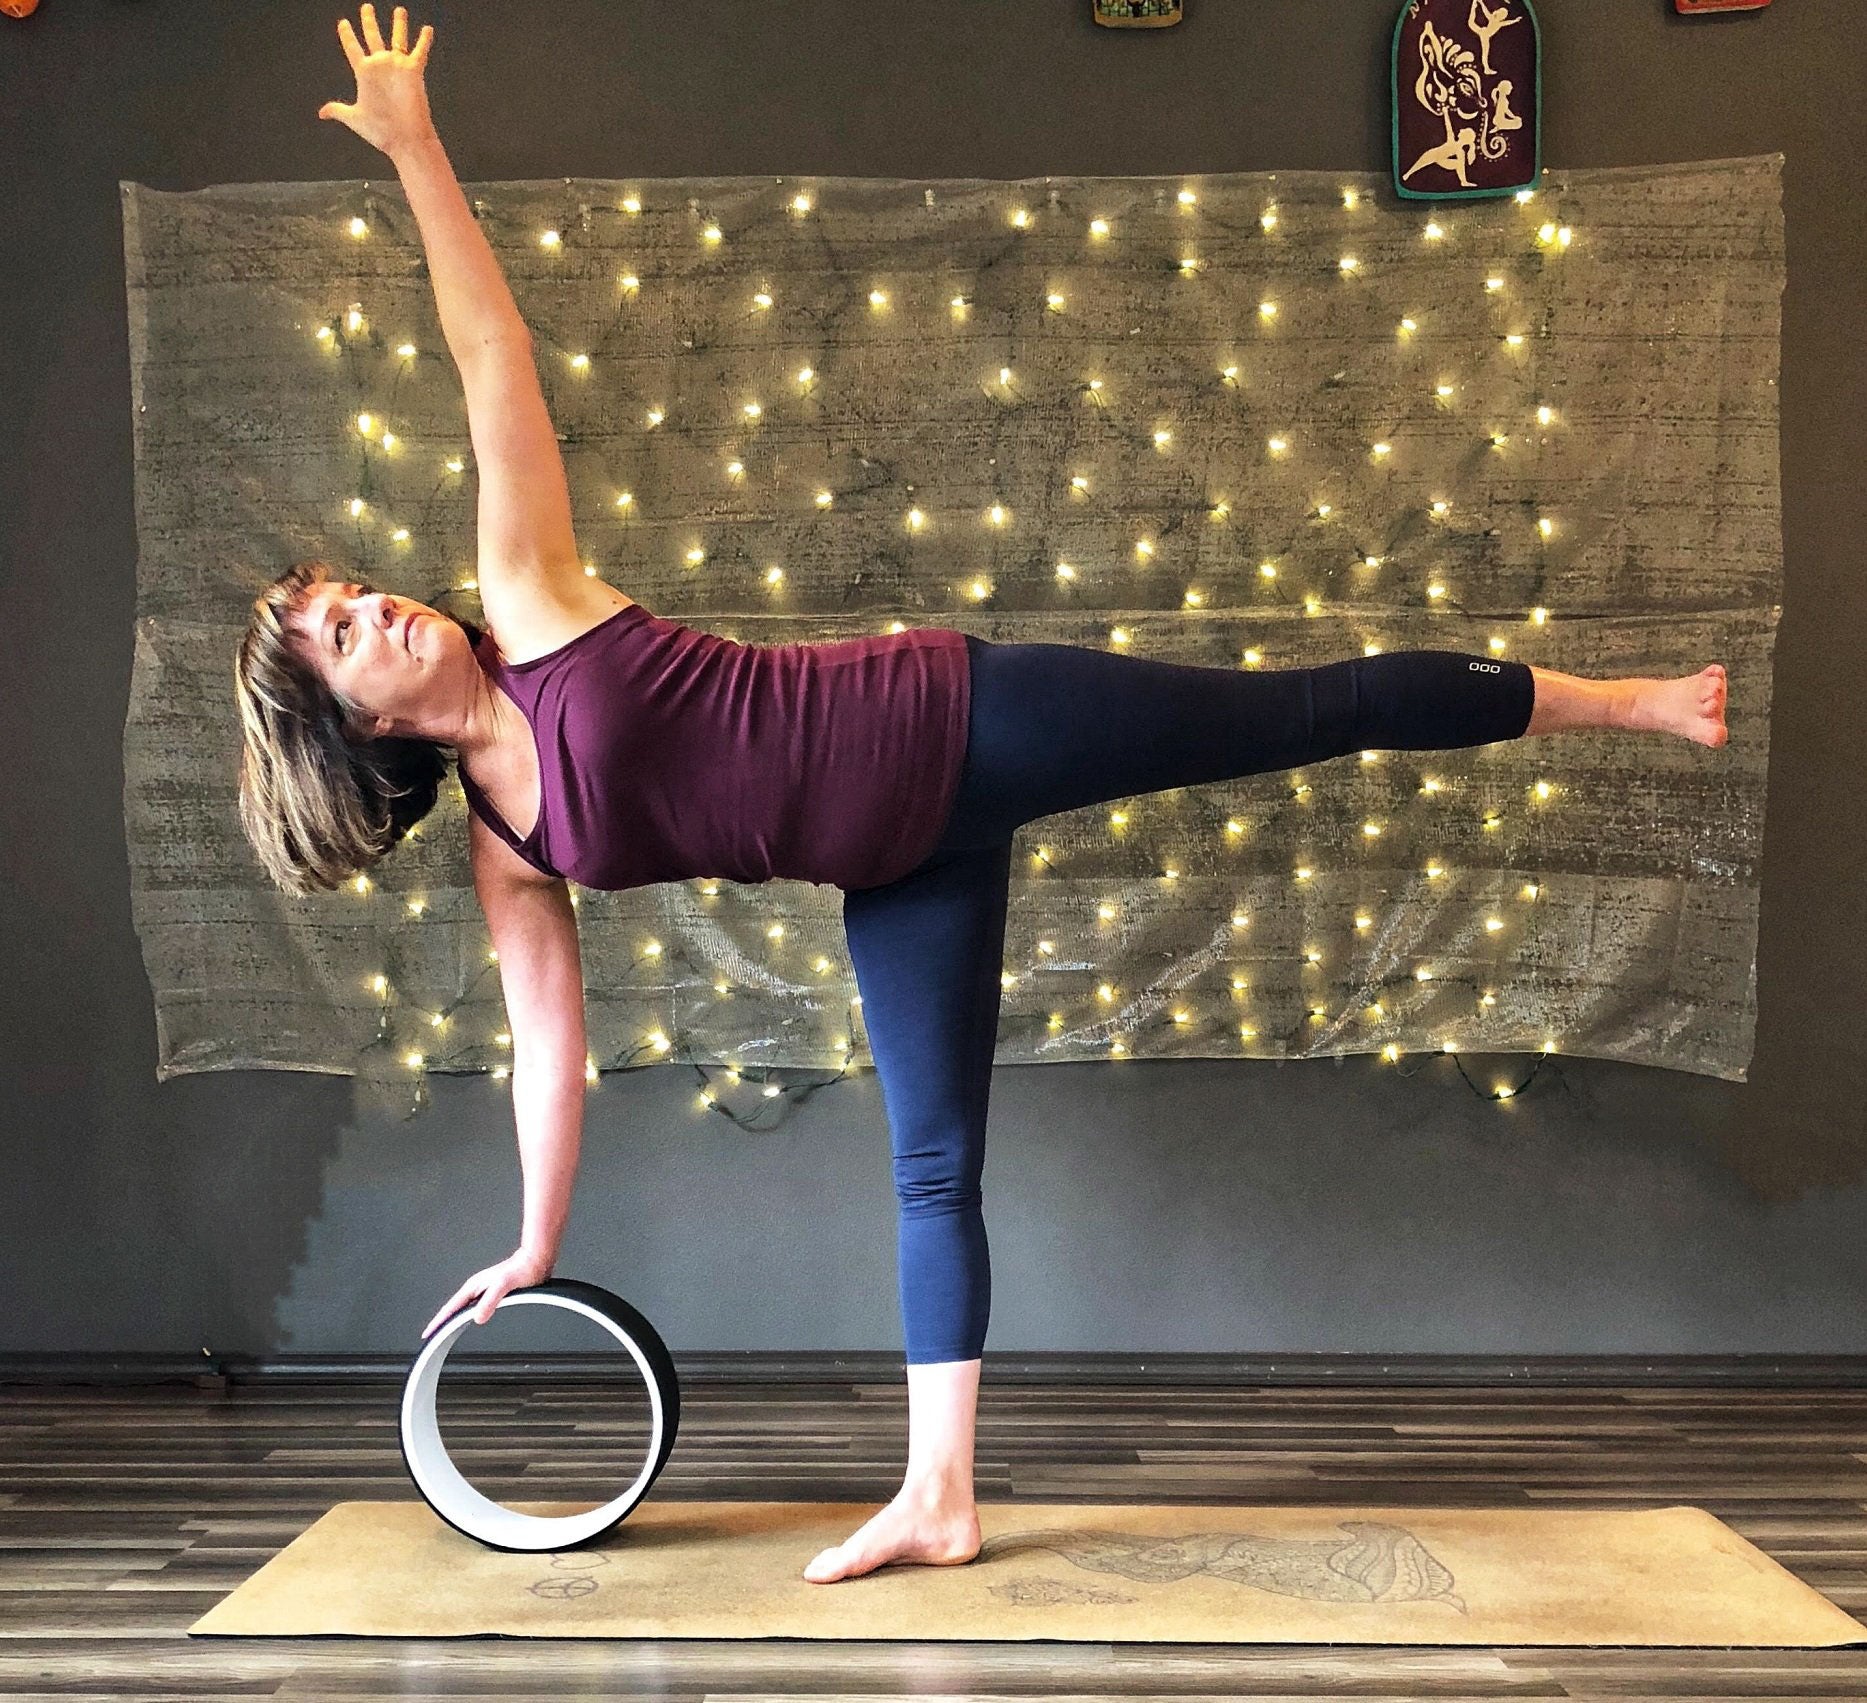 6 Ways to Improve Your Backbends Using a Yoga Wheel - Yoga with Kassandra  Blog